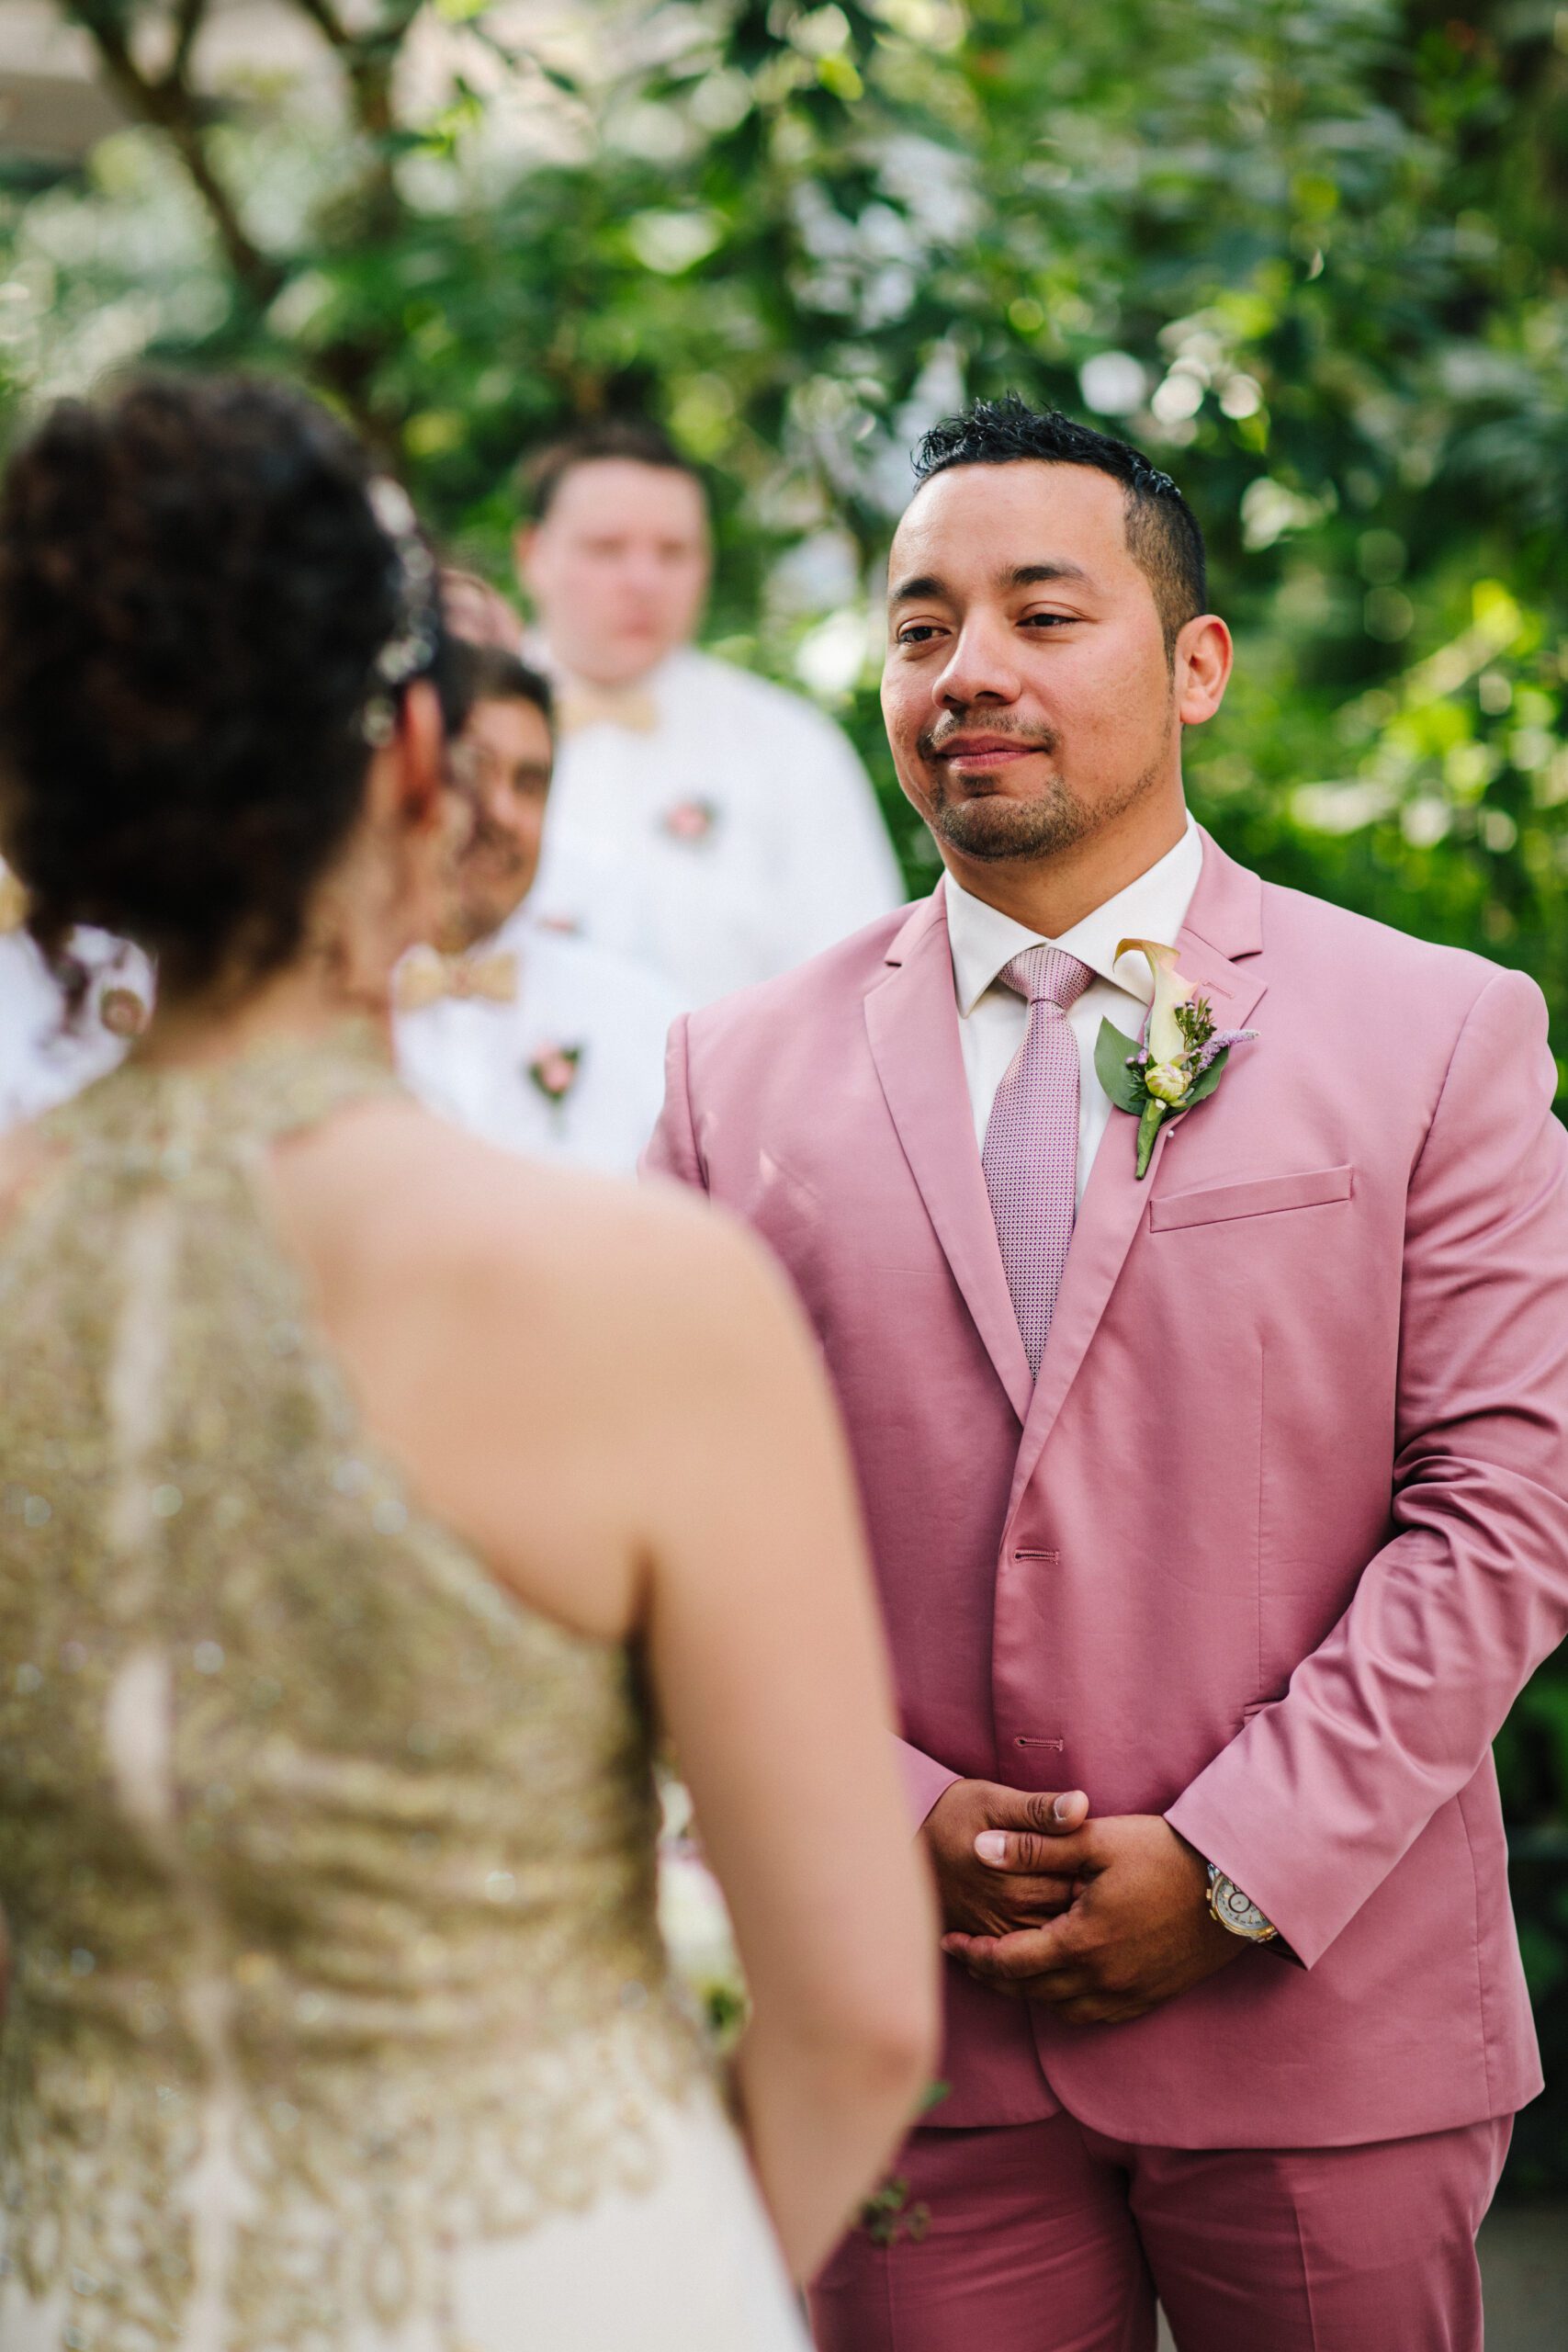 The groom looking sweetly at his beautiful bride during their Butterfly Pavilion wedding.